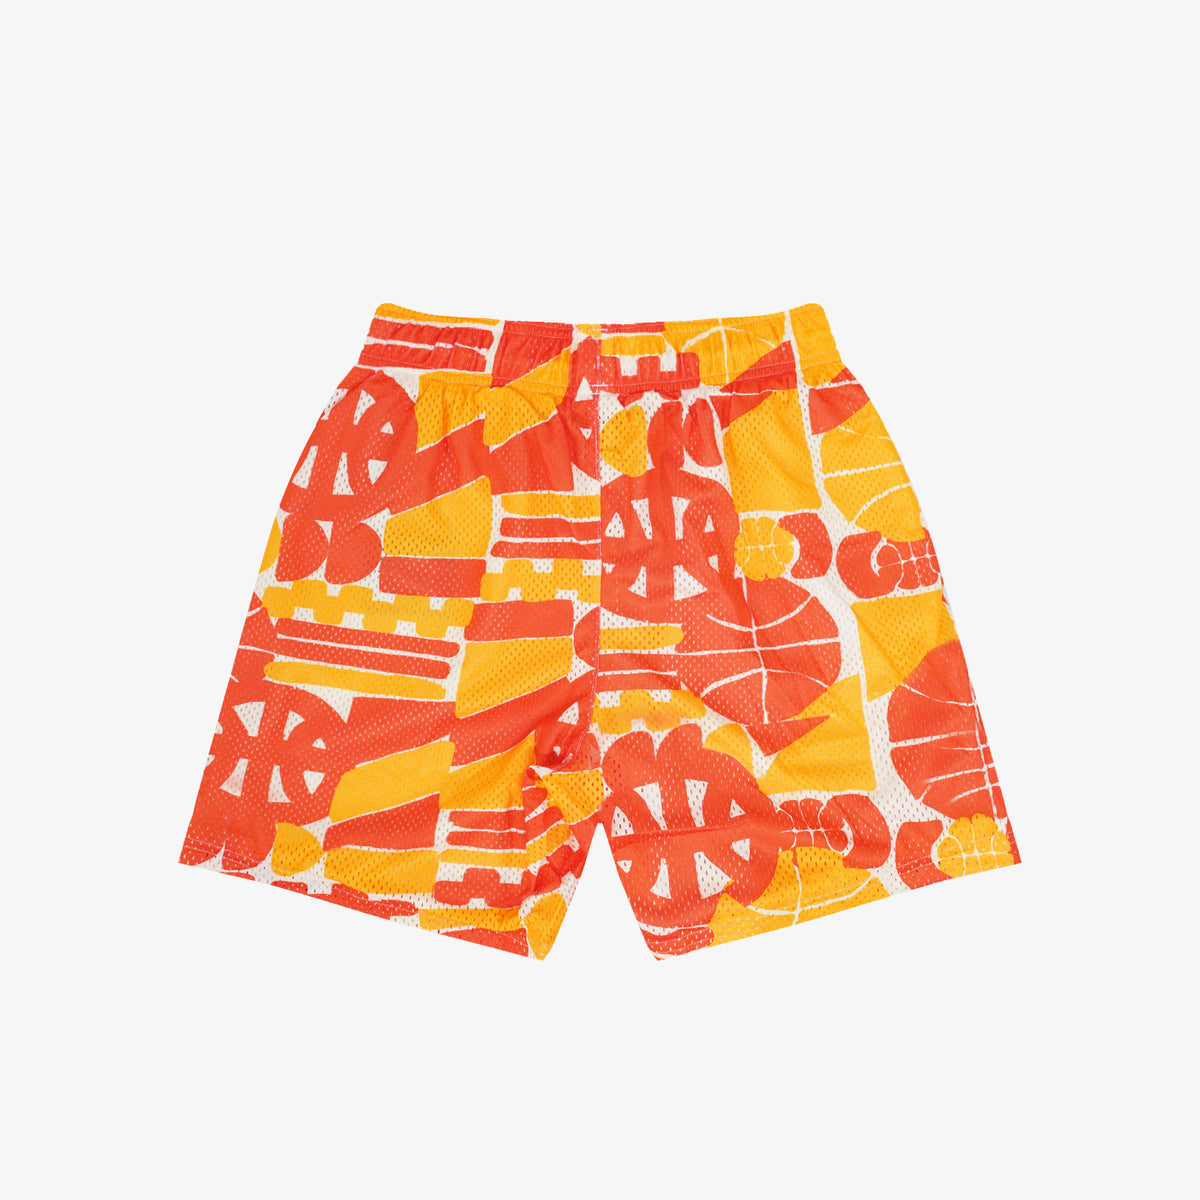 Spin Move Shorts - Spectra Yellow